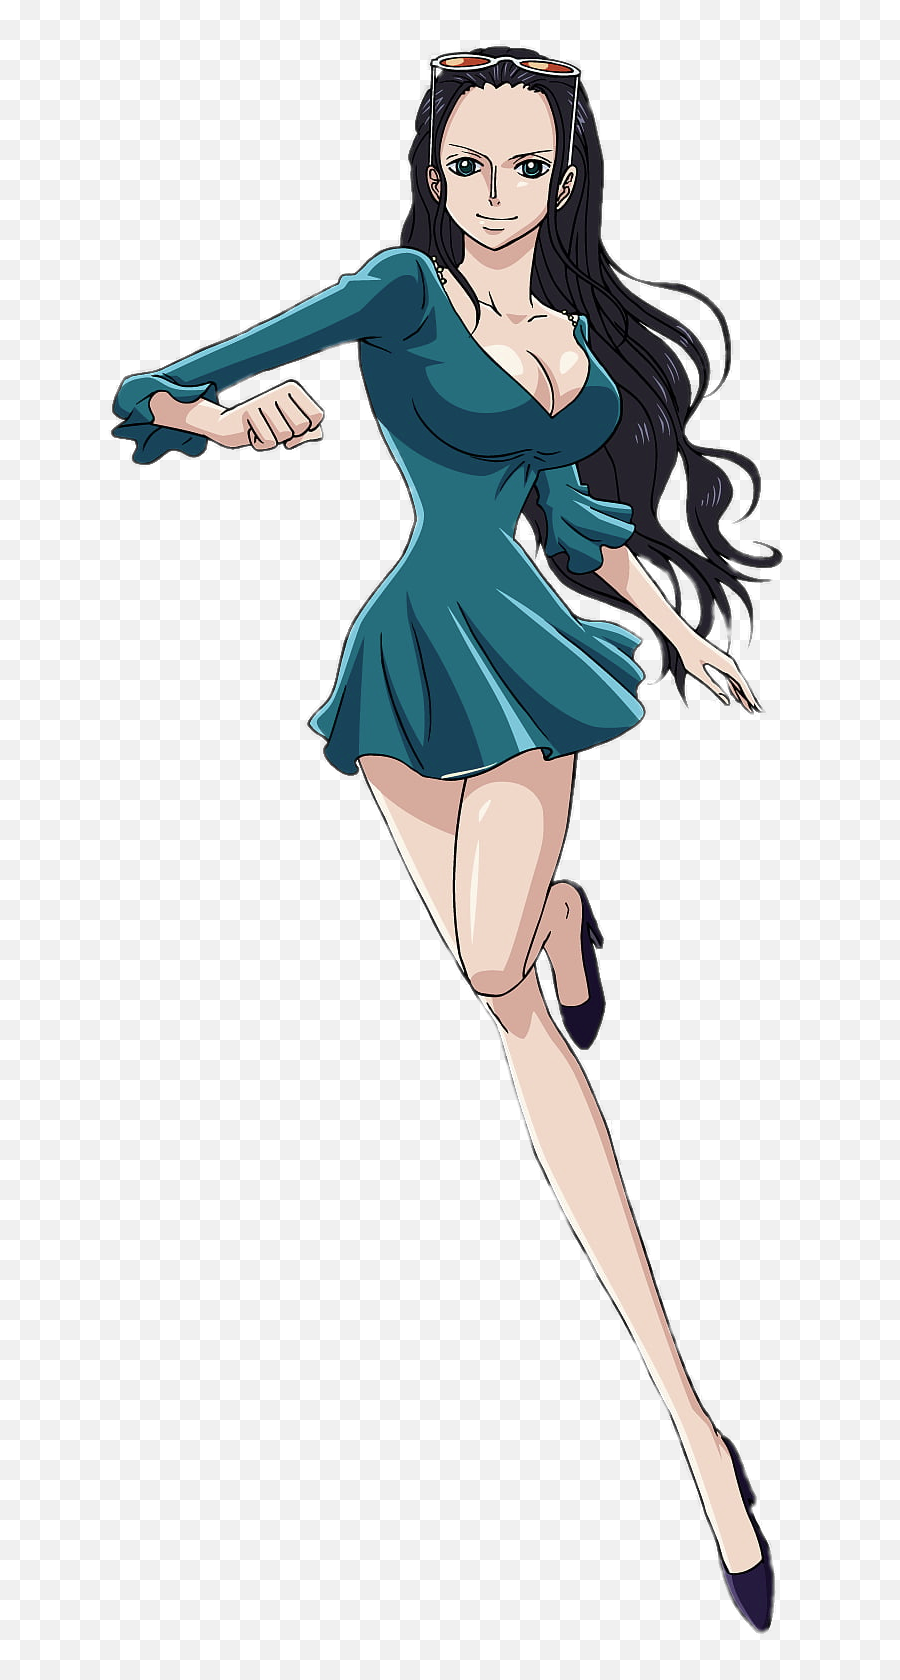 One Piece Nico Robin Running Png Image - One Piece Nico Robin,Running Transparent